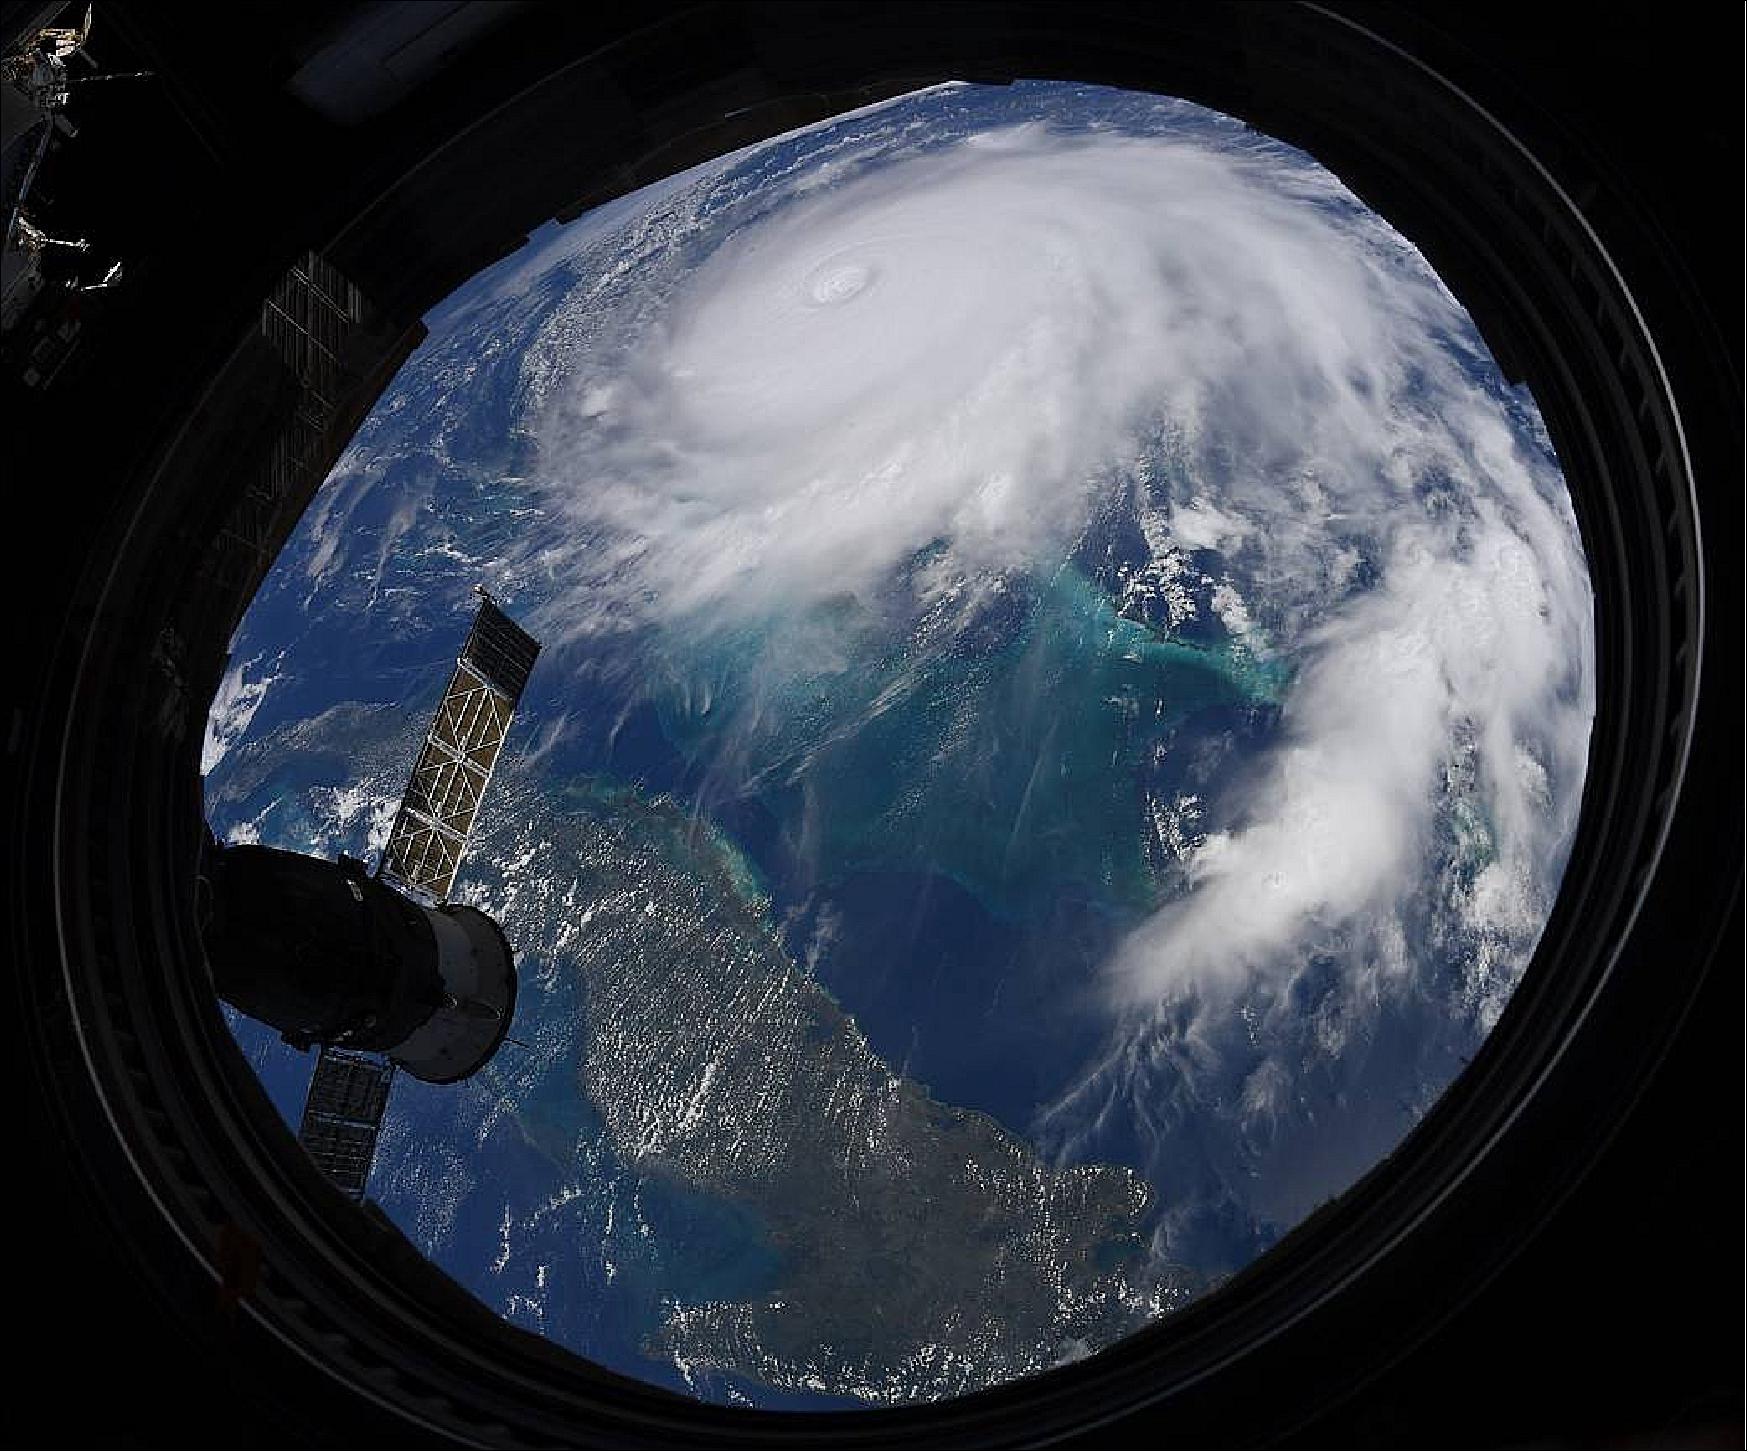 Figure 56: NASA astronaut Christian Koch snapped this image of Hurricane Dorian as the International Space Station during a flyover on Monday, September 2, 2019 (image credit: NASA)